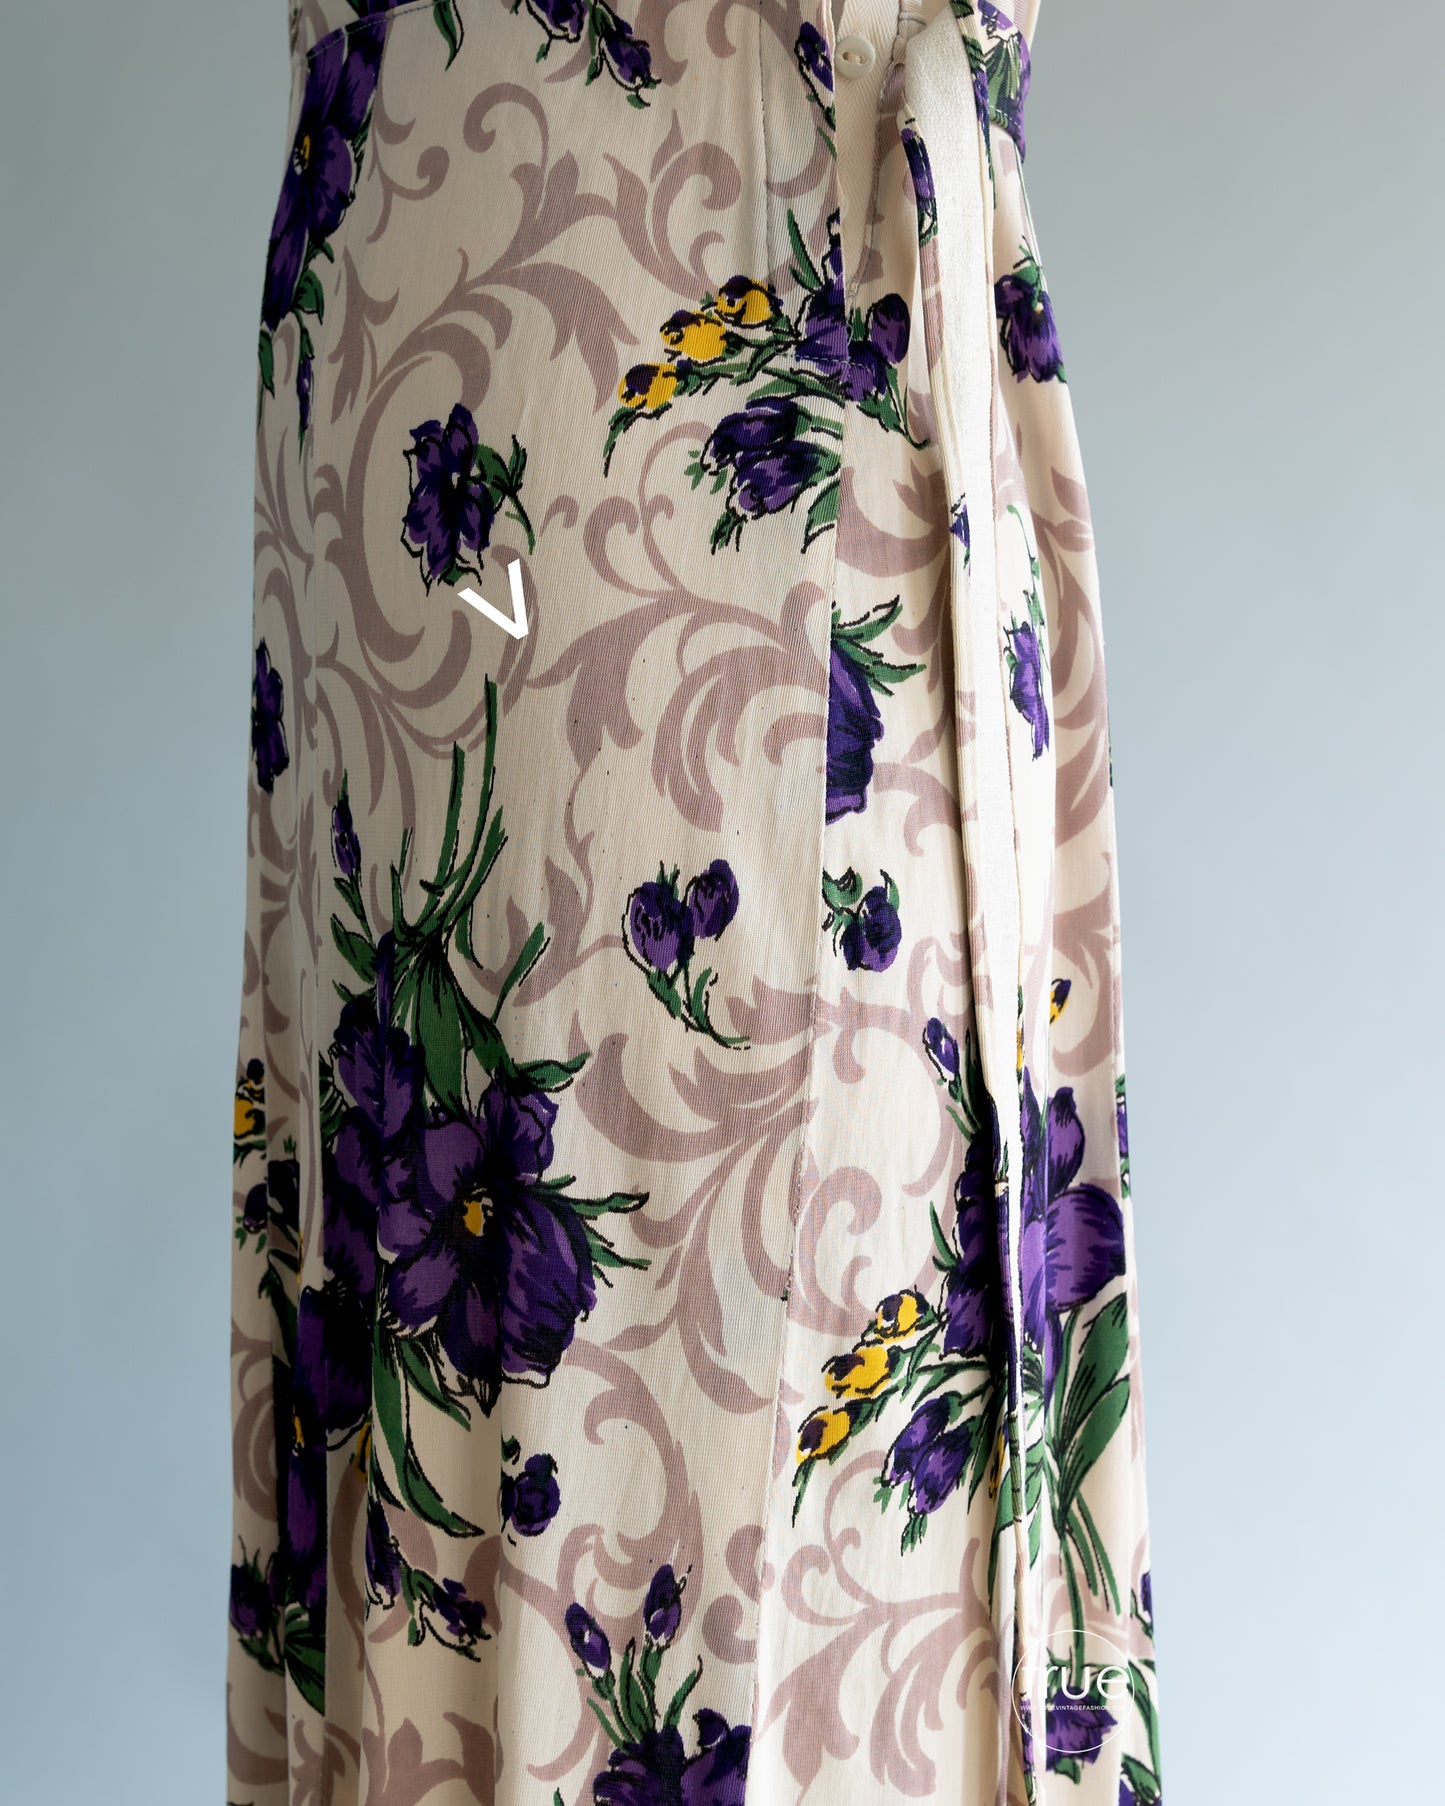 vintage 1930's dress ...the sweetest floral dress with wonderful shirring details & padded puff sleeves